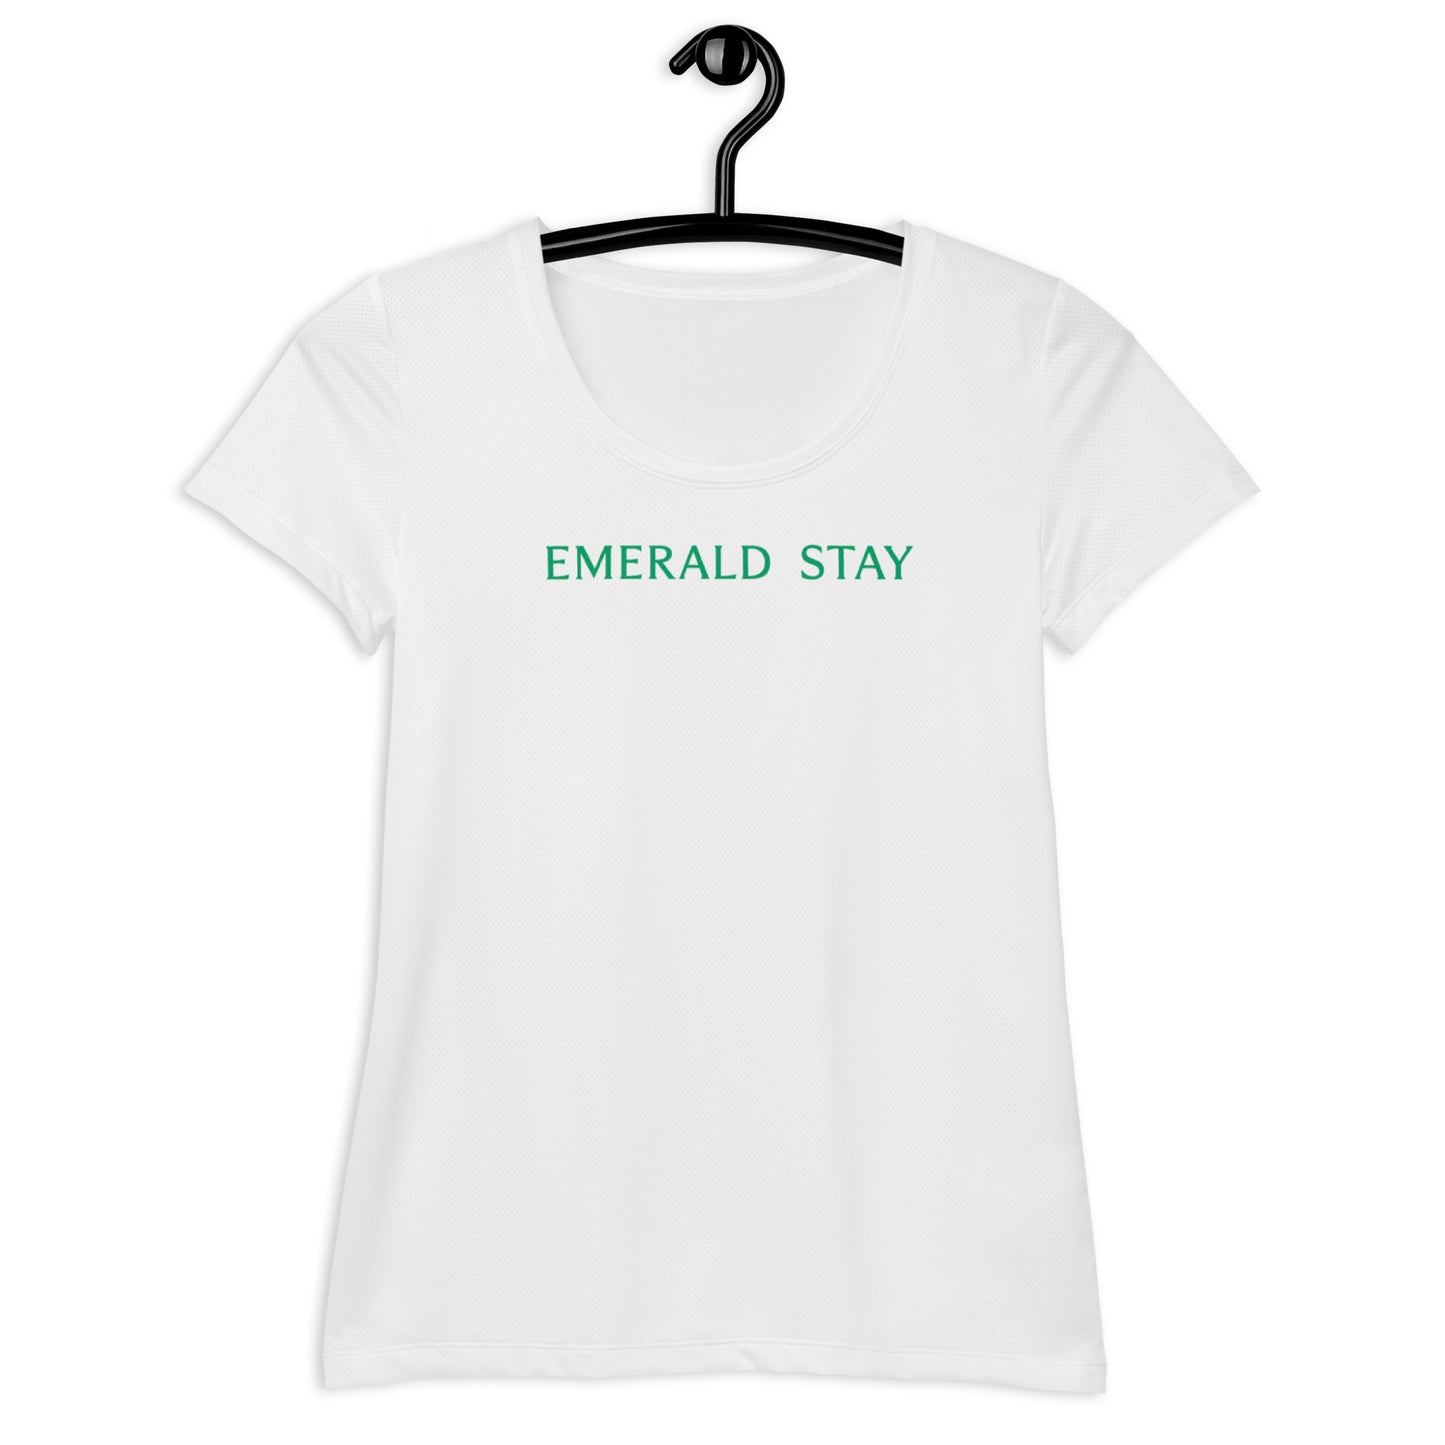 Emerald Stay - Women's Athletic T-shirt